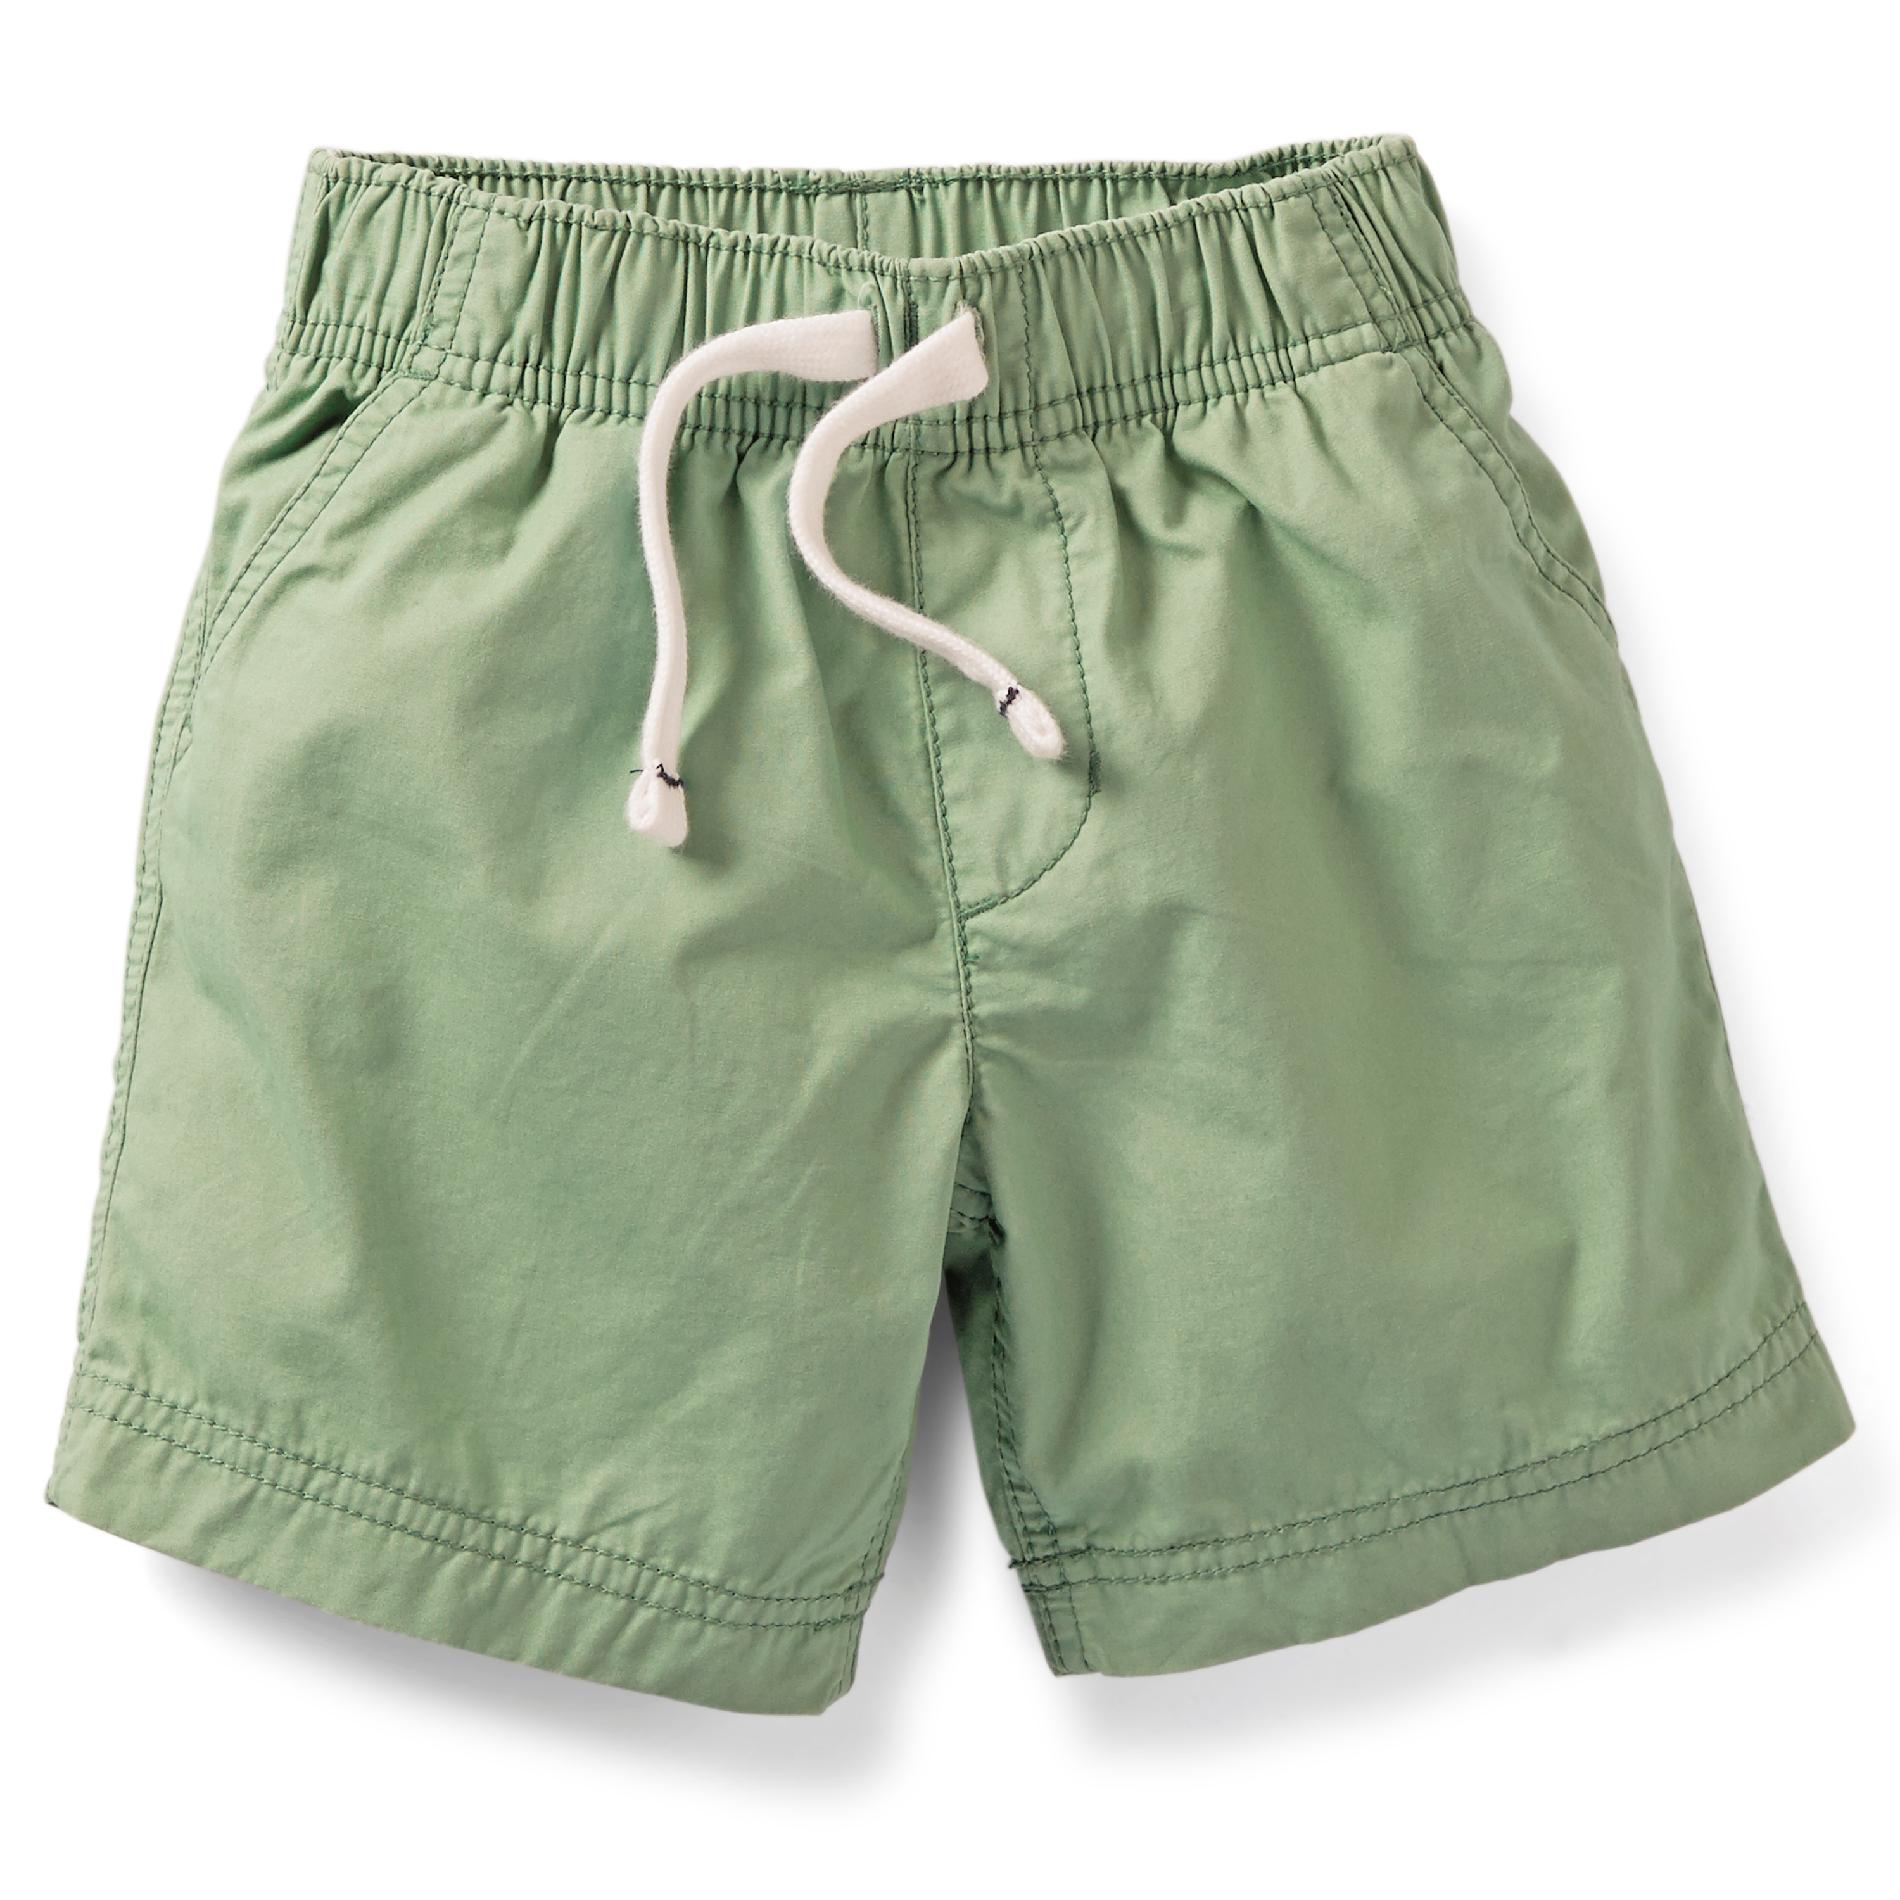 Carter's Boy's Green Woven Pull-On Shorts